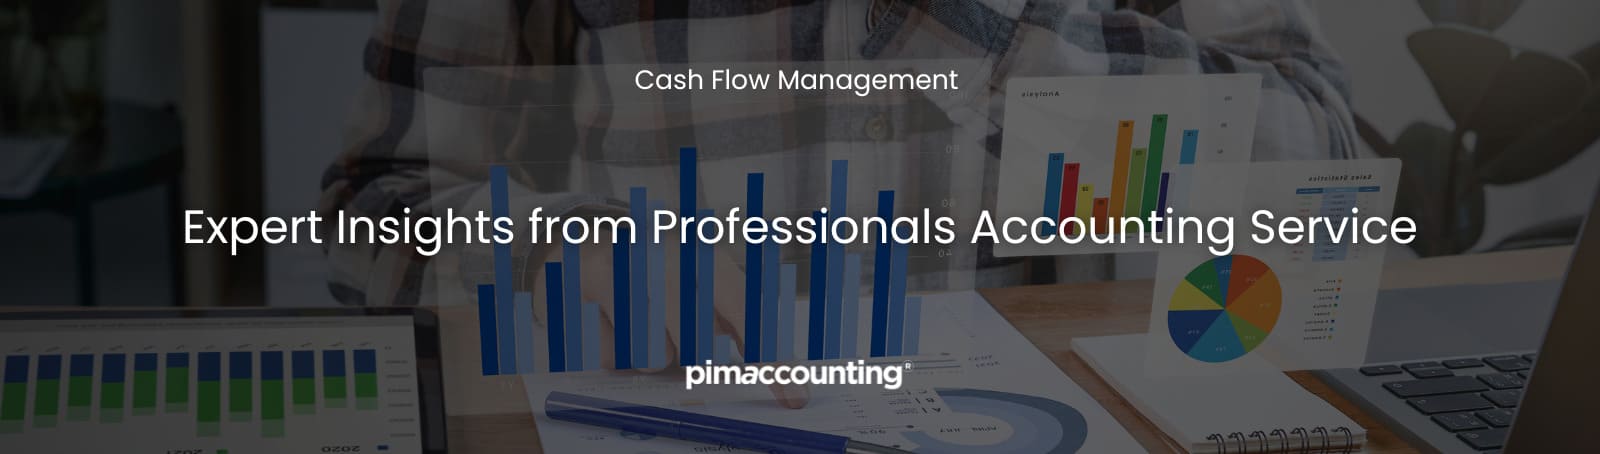 Cash Flow Management: Expert Insights from Professionals Accounting Service.